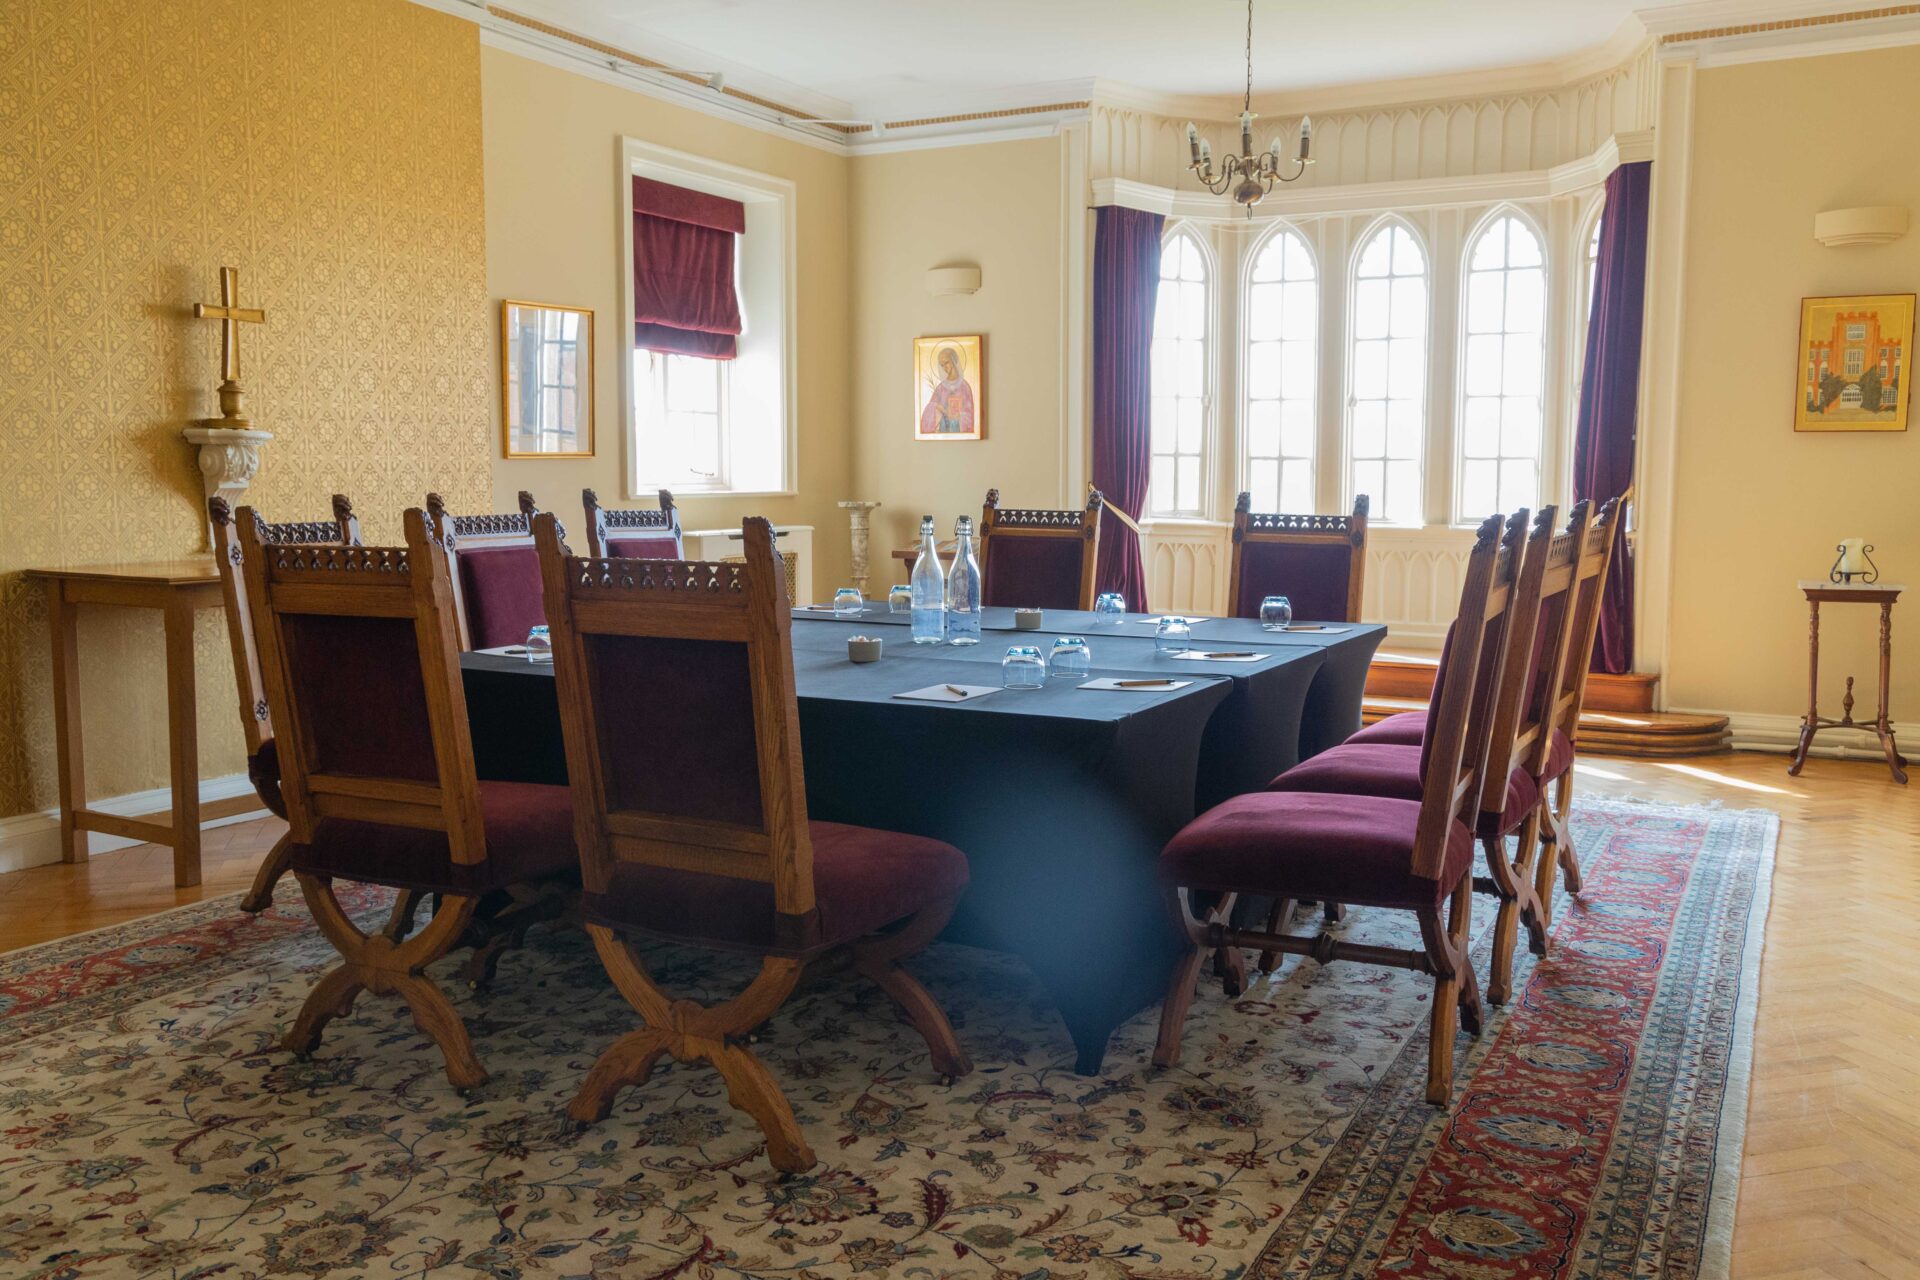 The Cumberland Lodge Chapel set up to seat 10 in a boardroom style